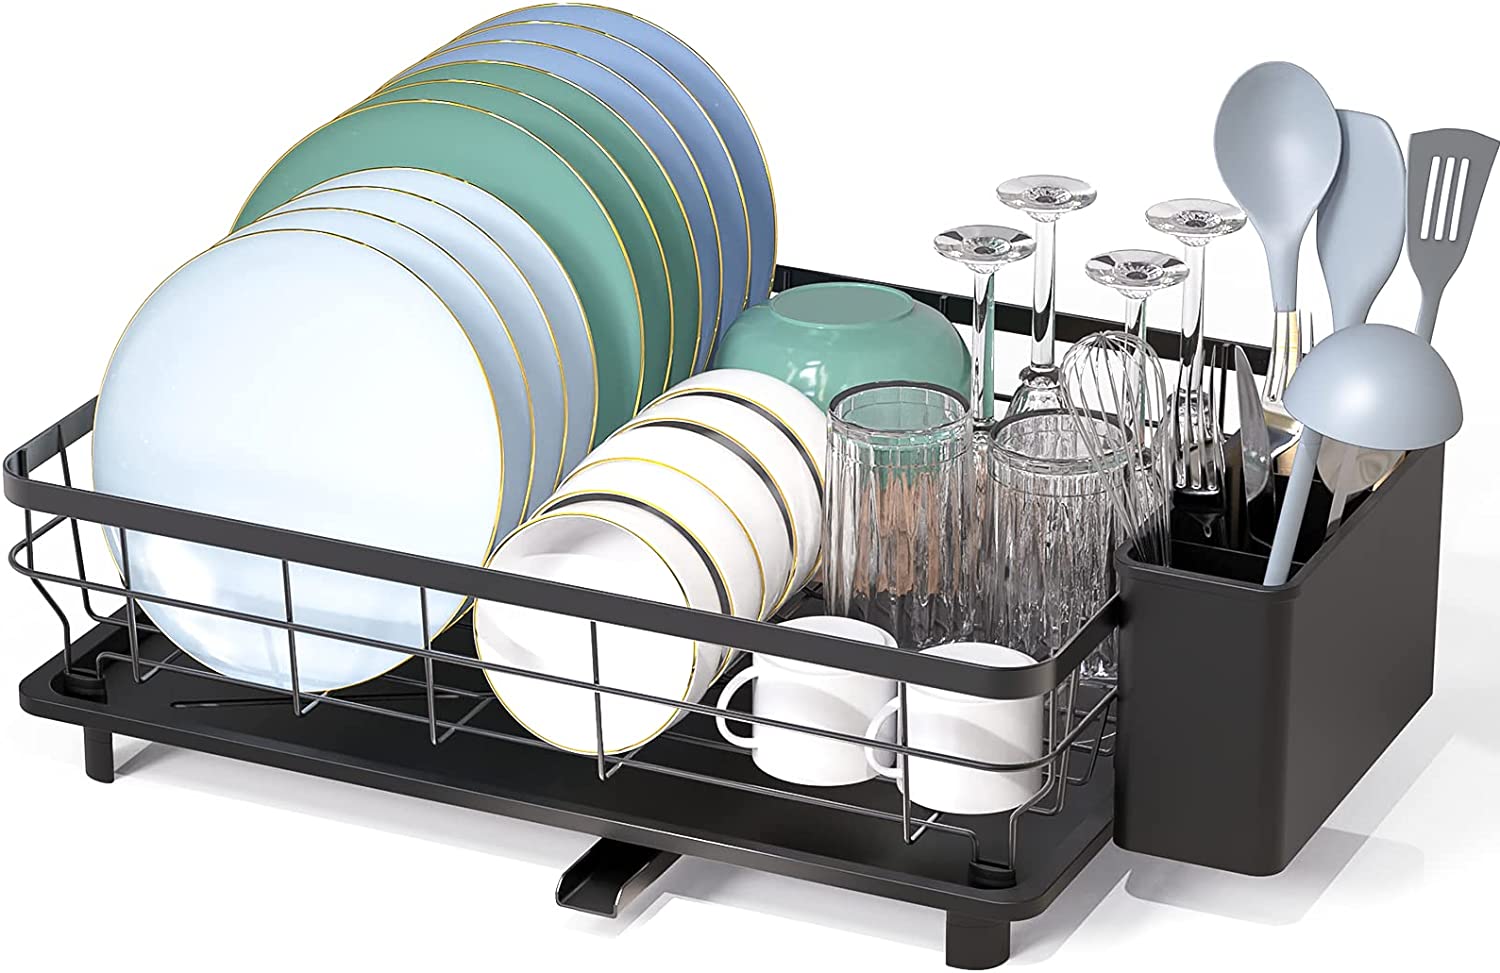 MAJALiS Red Dish Drying Rack Drainboard Set, 2 Tier Stainless Steel Dish  Racks with Drainage, Wine Glass Holder, Utensil Holder and Extra Drying  Mat